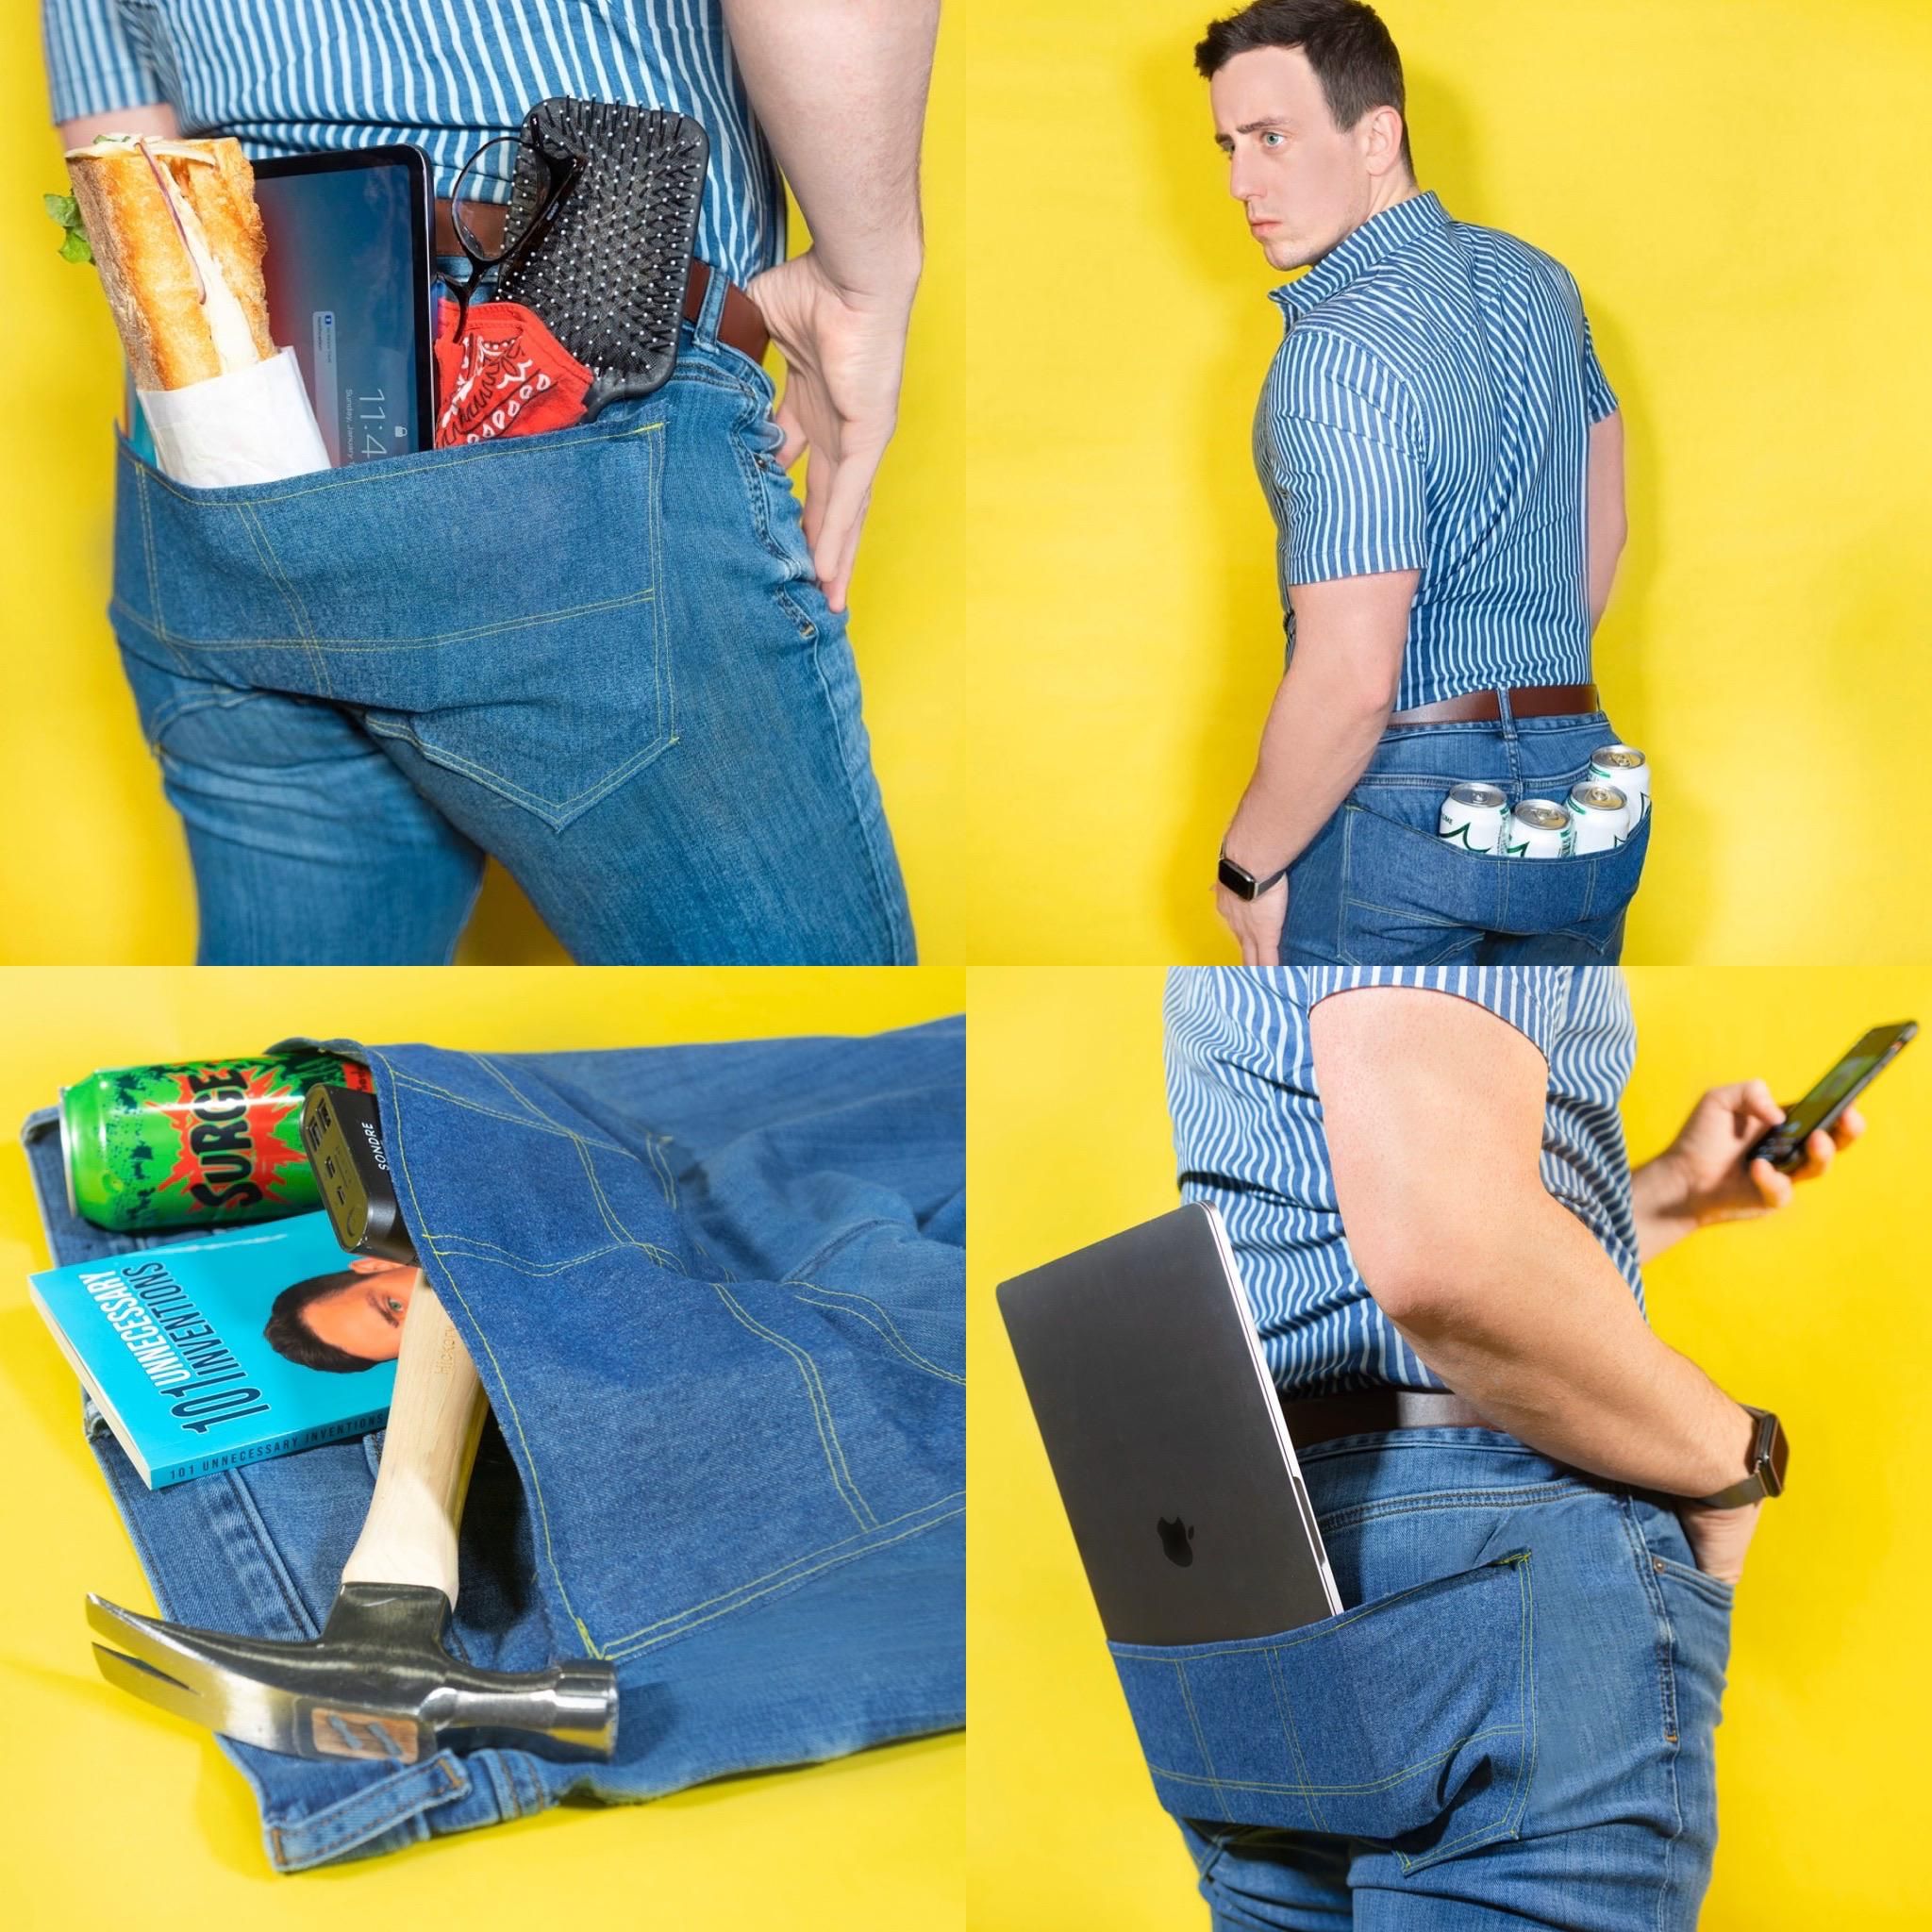 I design ridiculous product ideas for fun, so I designed a pair of jeans with one giant pocket across the butt for all your essentials.